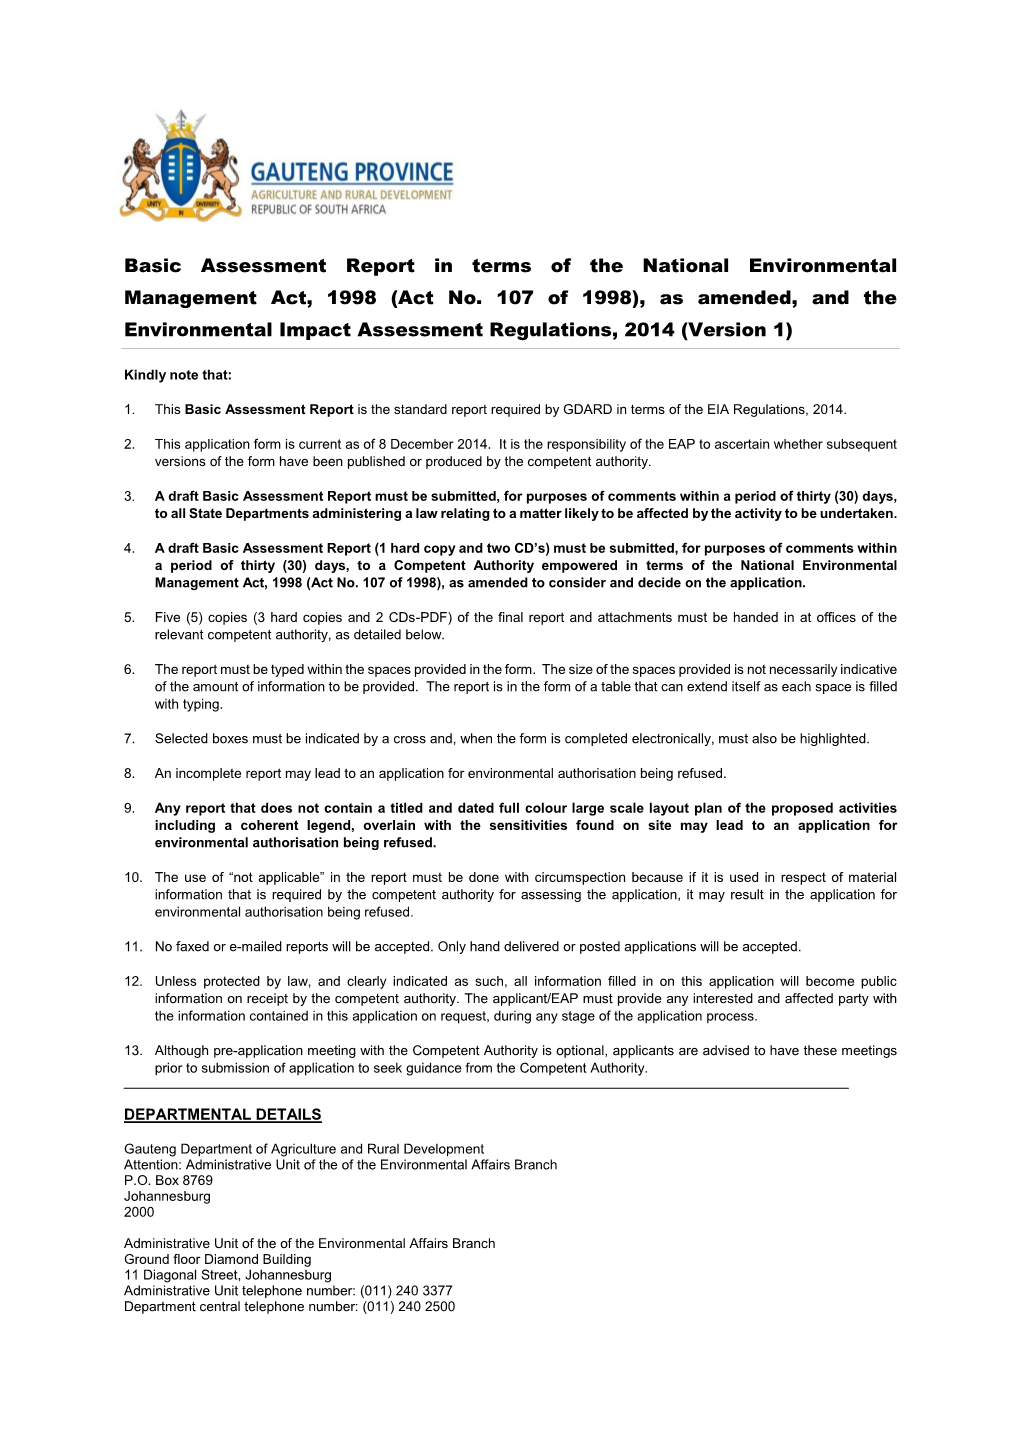 Basic Assessment Report in Terms of the National Environmental Management Act, 1998 (Act No